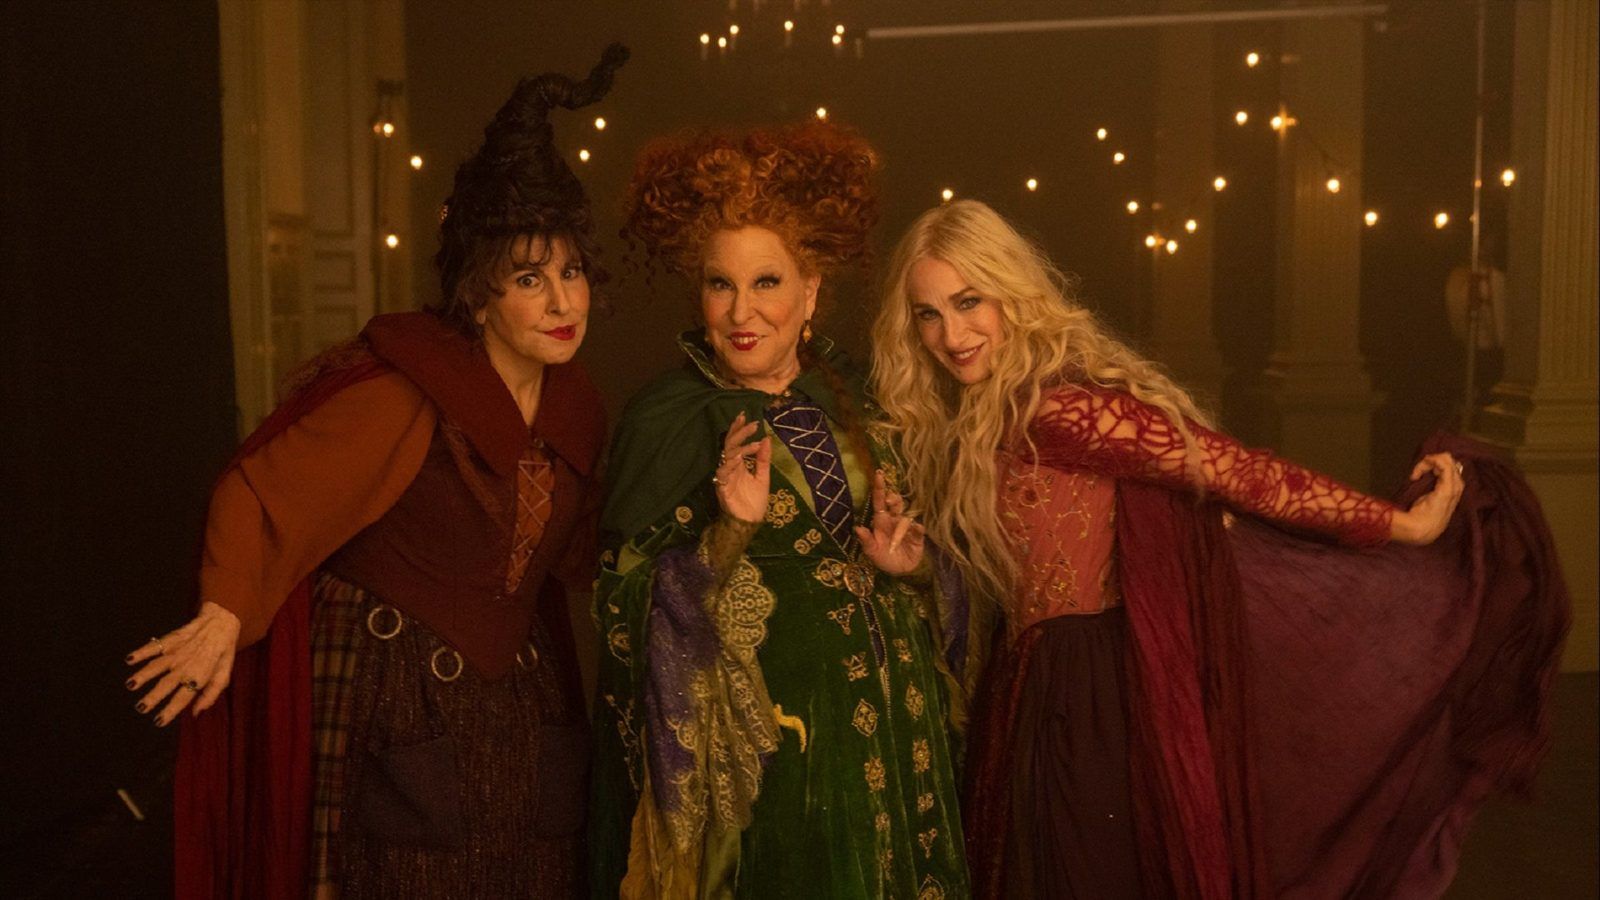 The infamous Sanderson sisters are back in the first trailer of ‘Hocus Pocus 2’